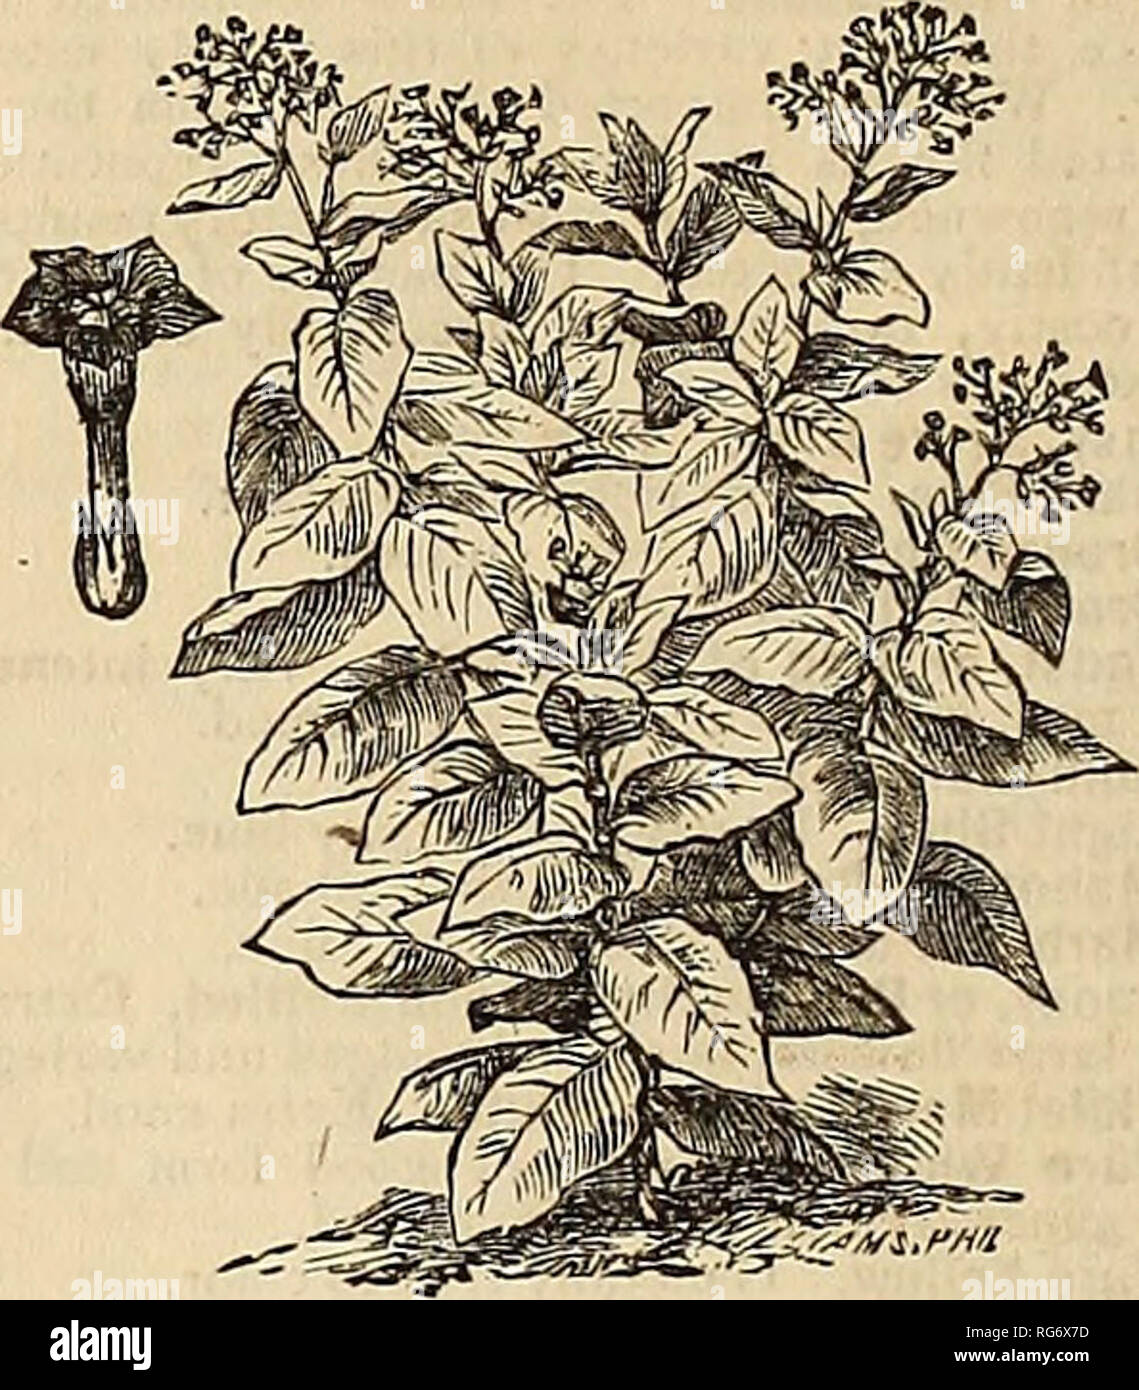 . [Burpee's farm annual]. Nursery stock Pennsylvania Philadelphia Catalogs; Flowers Catalogs; Vegetables Catalogs; Seeds Catalogs; Livestock Catalogs. iro ?4o.—Scabiosa, Large Douelh. No. i2i.—Godetia, Lady Albemarle. 229. ffScinilS, Sanguineus. Red stalks, scarlet fruit; 5 ft. 230. BraziliensiS. Dark-green fruit; 10 ft. 2.31. Gibsoni, new, with dark purple stem and leaves, very fine and ornamental. 232. New Species from the Phillipines; very large leaves ; grows 6 to 10 ft. high. 233. Nanus MicrocarpuS. Dwarf, grows only 2 to 3 ft. in height; fine for groups. 234. Communis, (Palma Chrisli). C Stock Photo